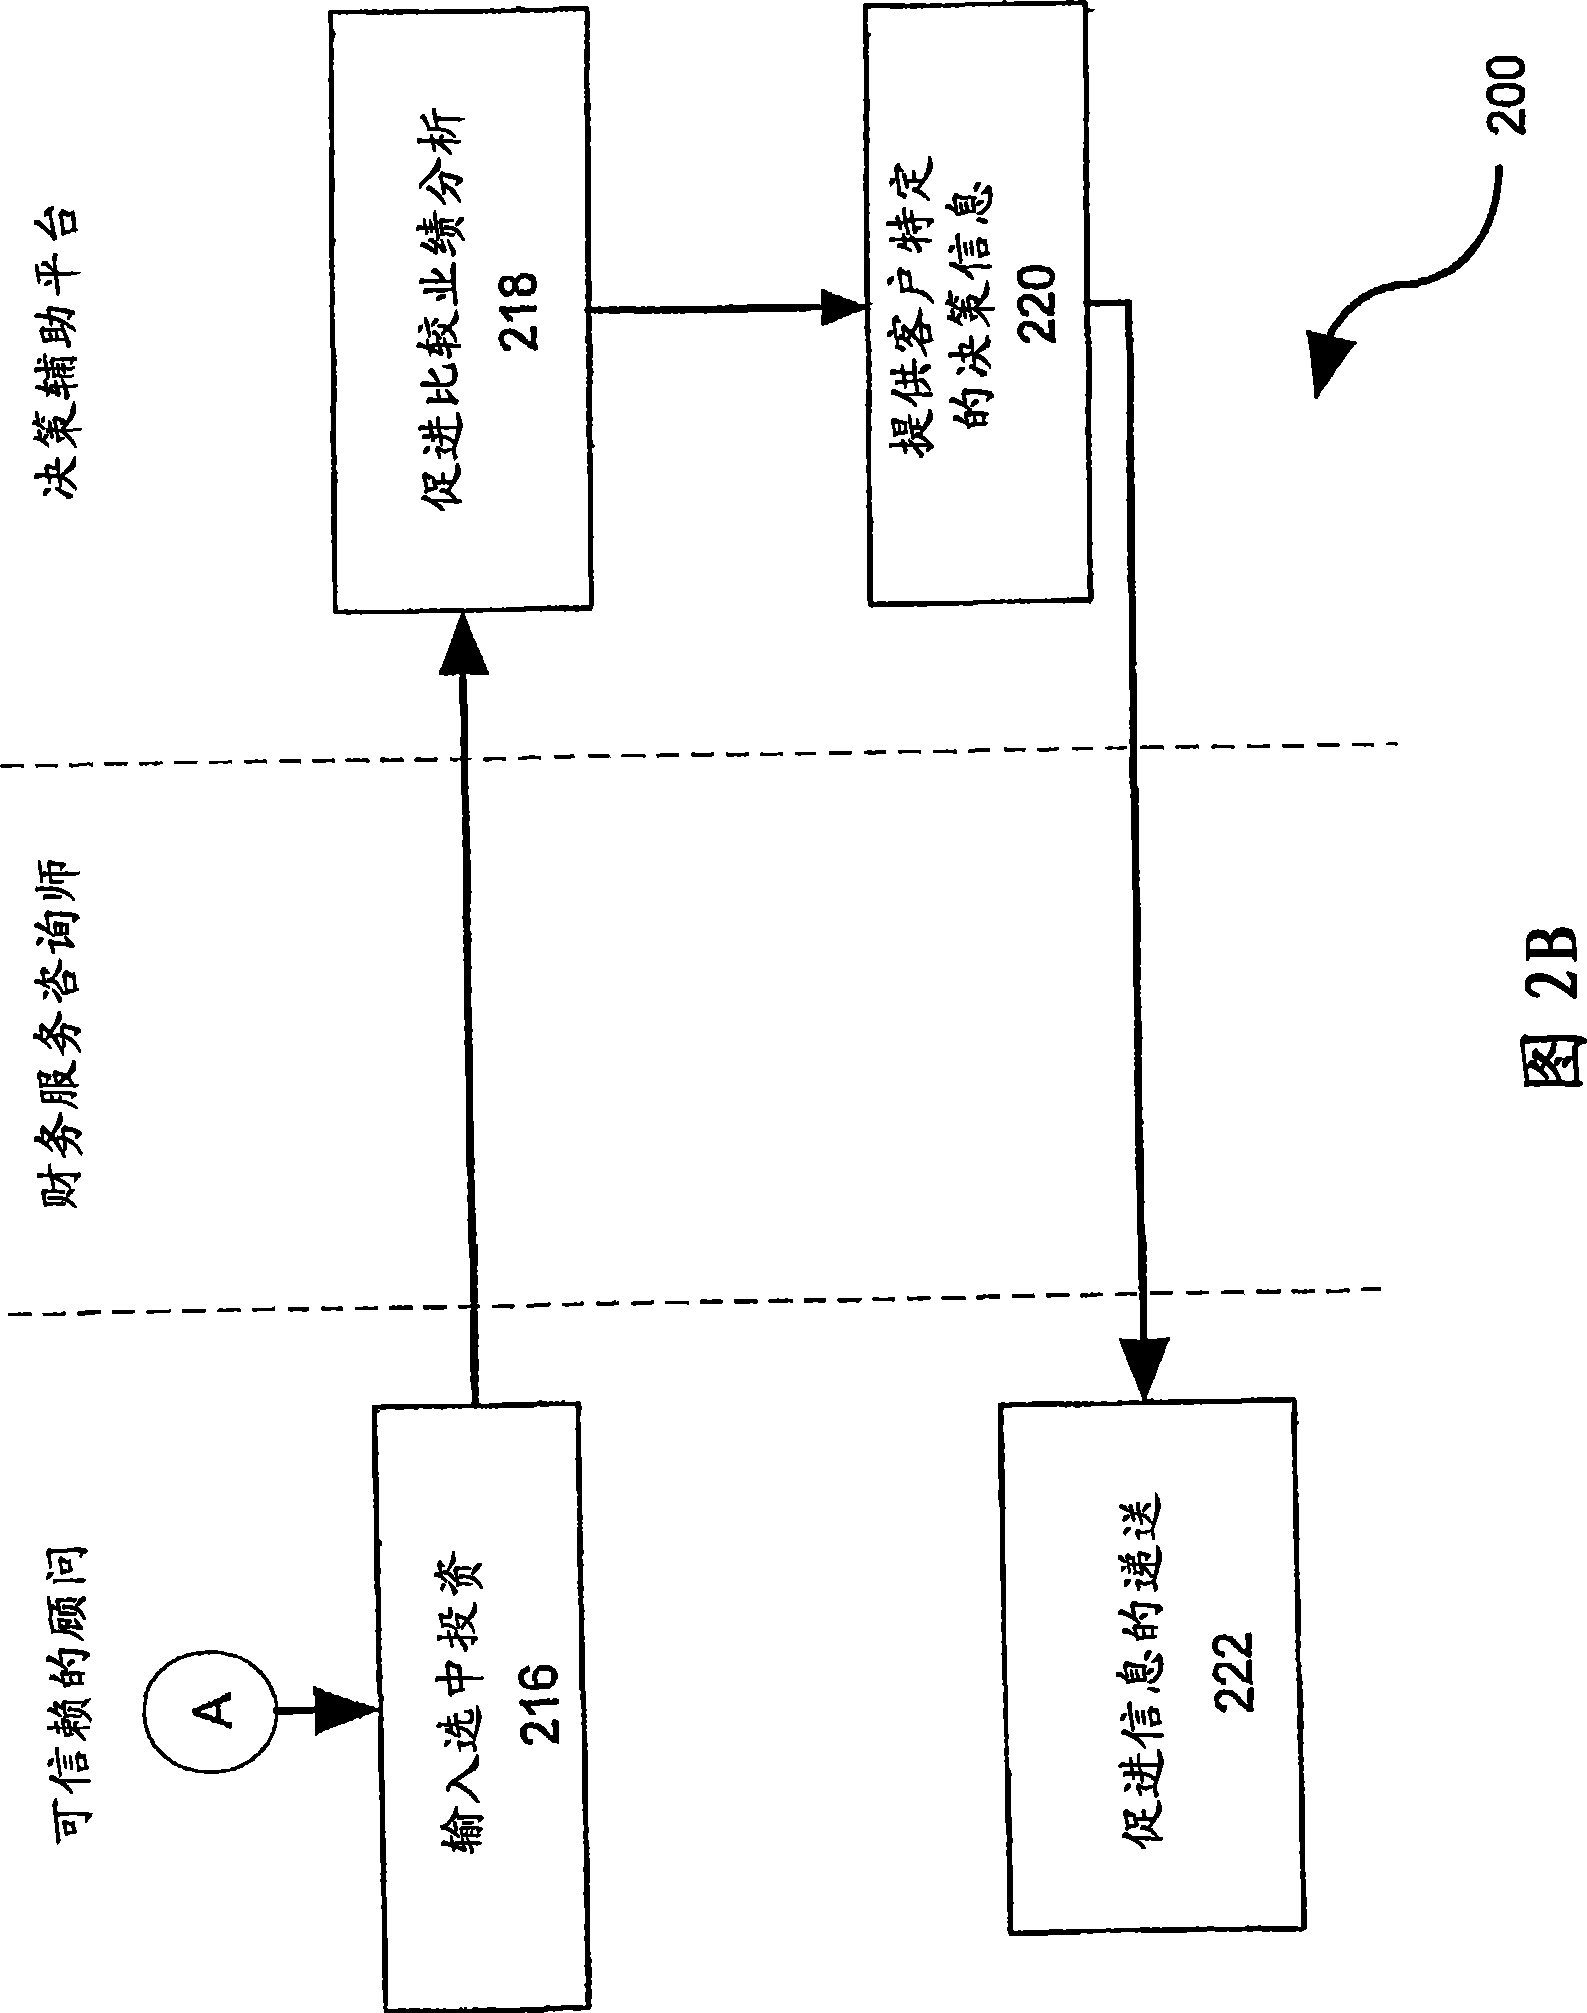 Configuring system and method for accelerating financial analysis